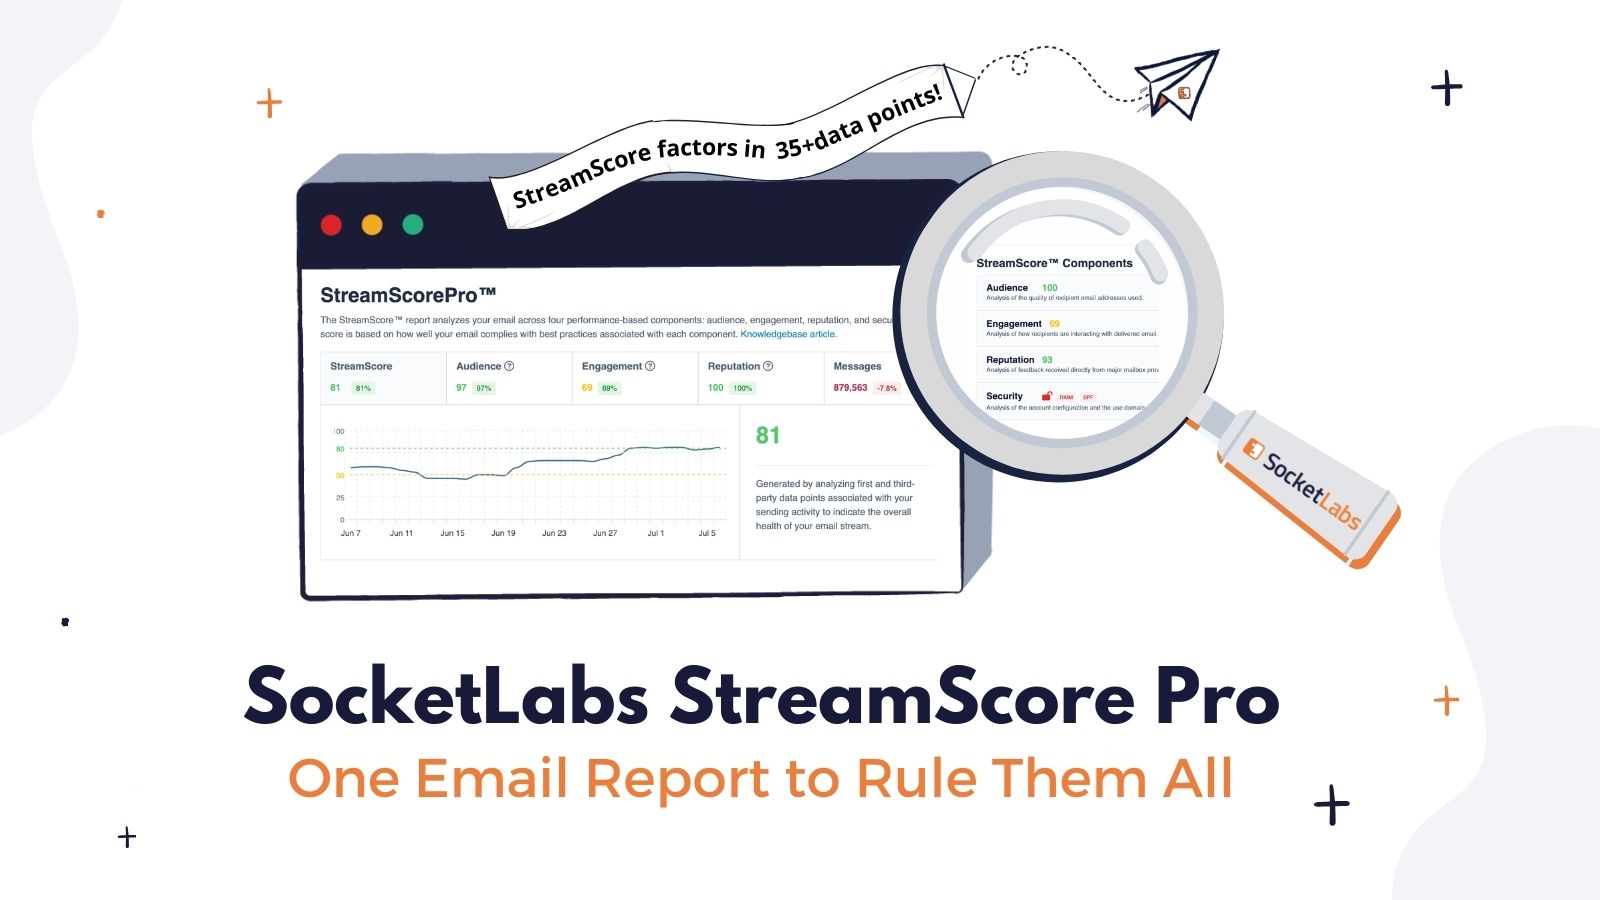 SocketLabs' StreamScore: One email report to rule them all. Factoring in 35+ data points into your score!